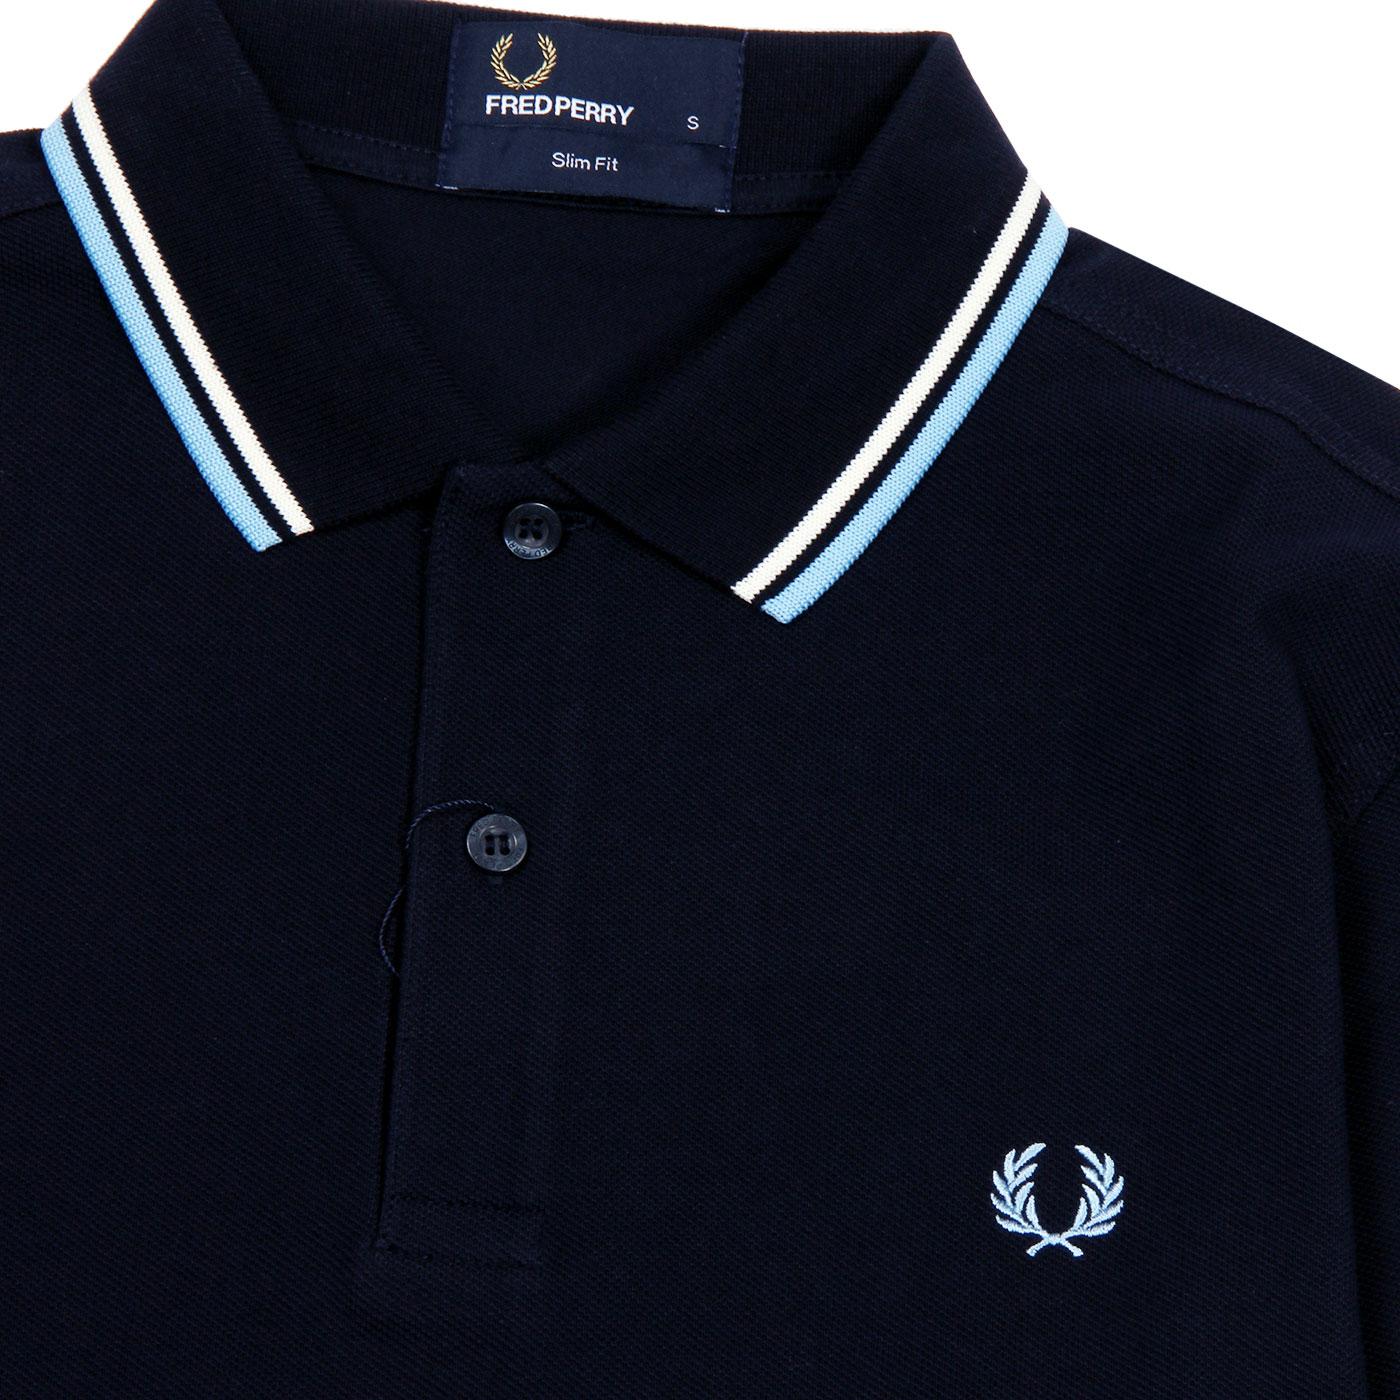 FRED PERRY Mod Long Sleeve Twin Tipped Pique Polo in Navy